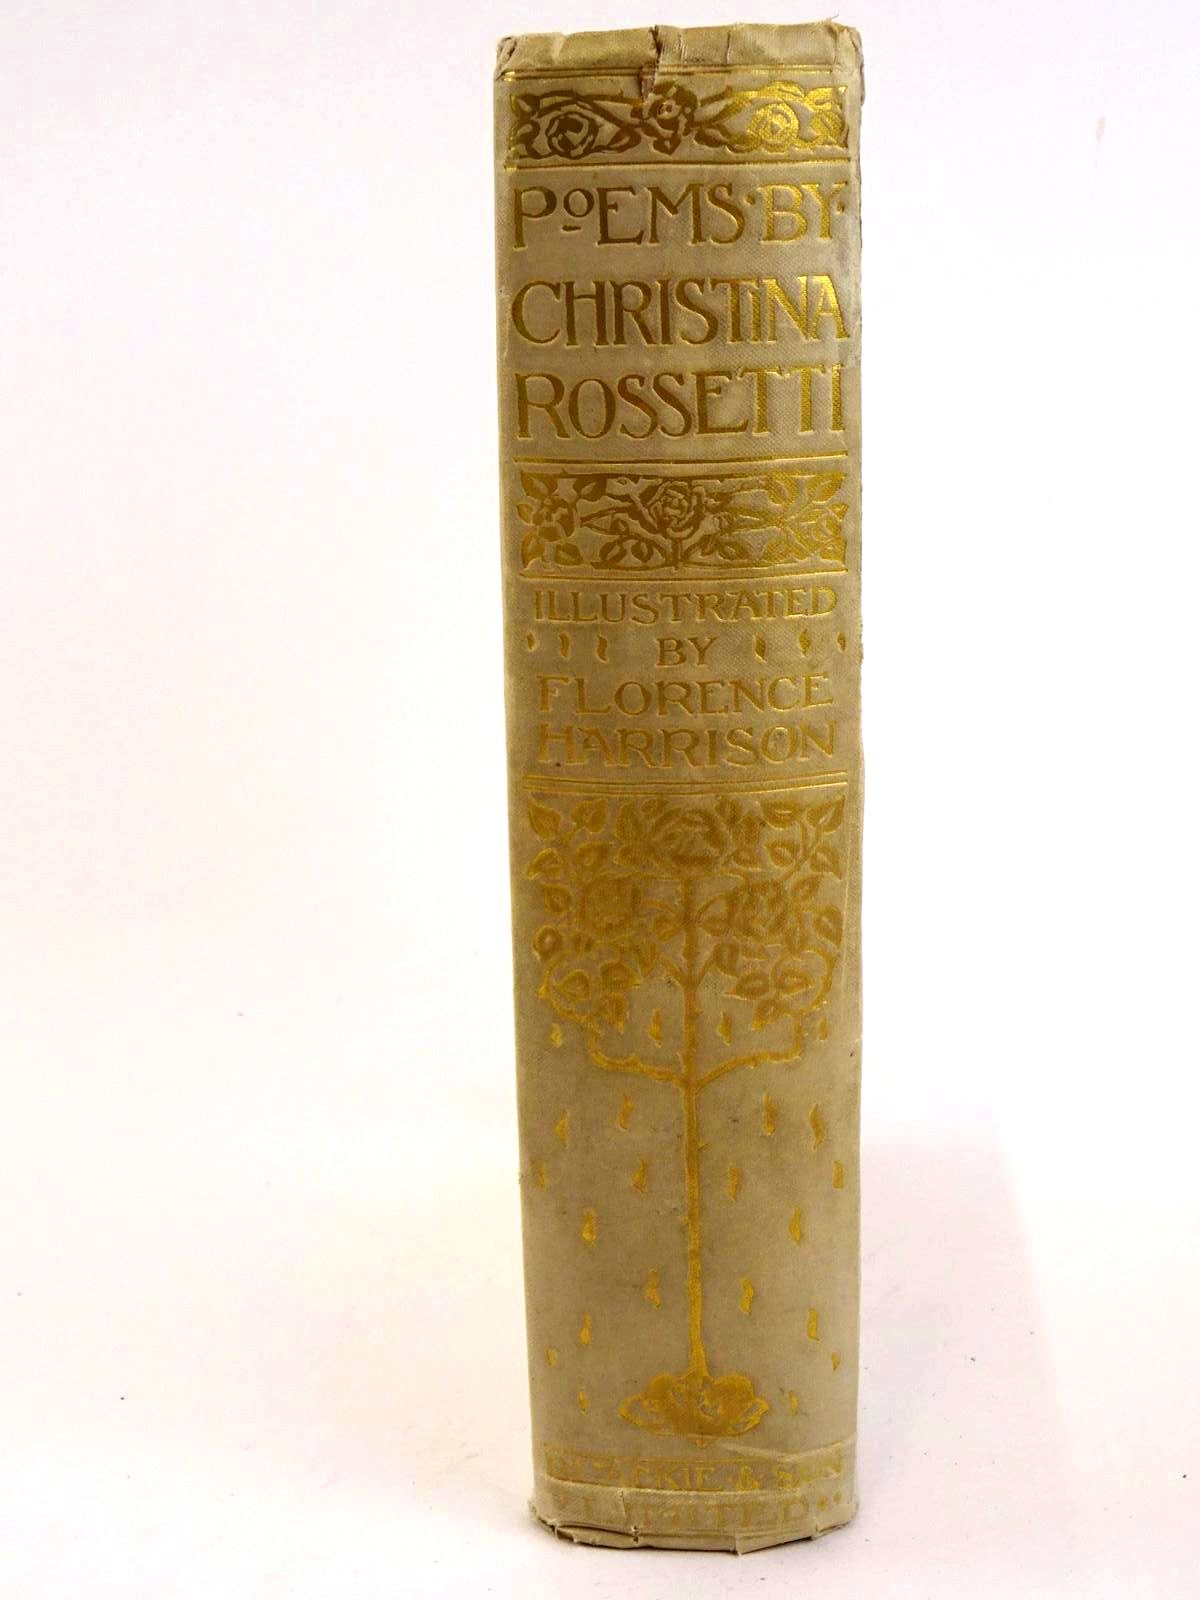 Photo of POEMS BY CHRISTINA ROSSETTI written by Rossetti, Christina illustrated by Harrison, Florence published by Blackie & Son Ltd. (STOCK CODE: 1318326)  for sale by Stella & Rose's Books